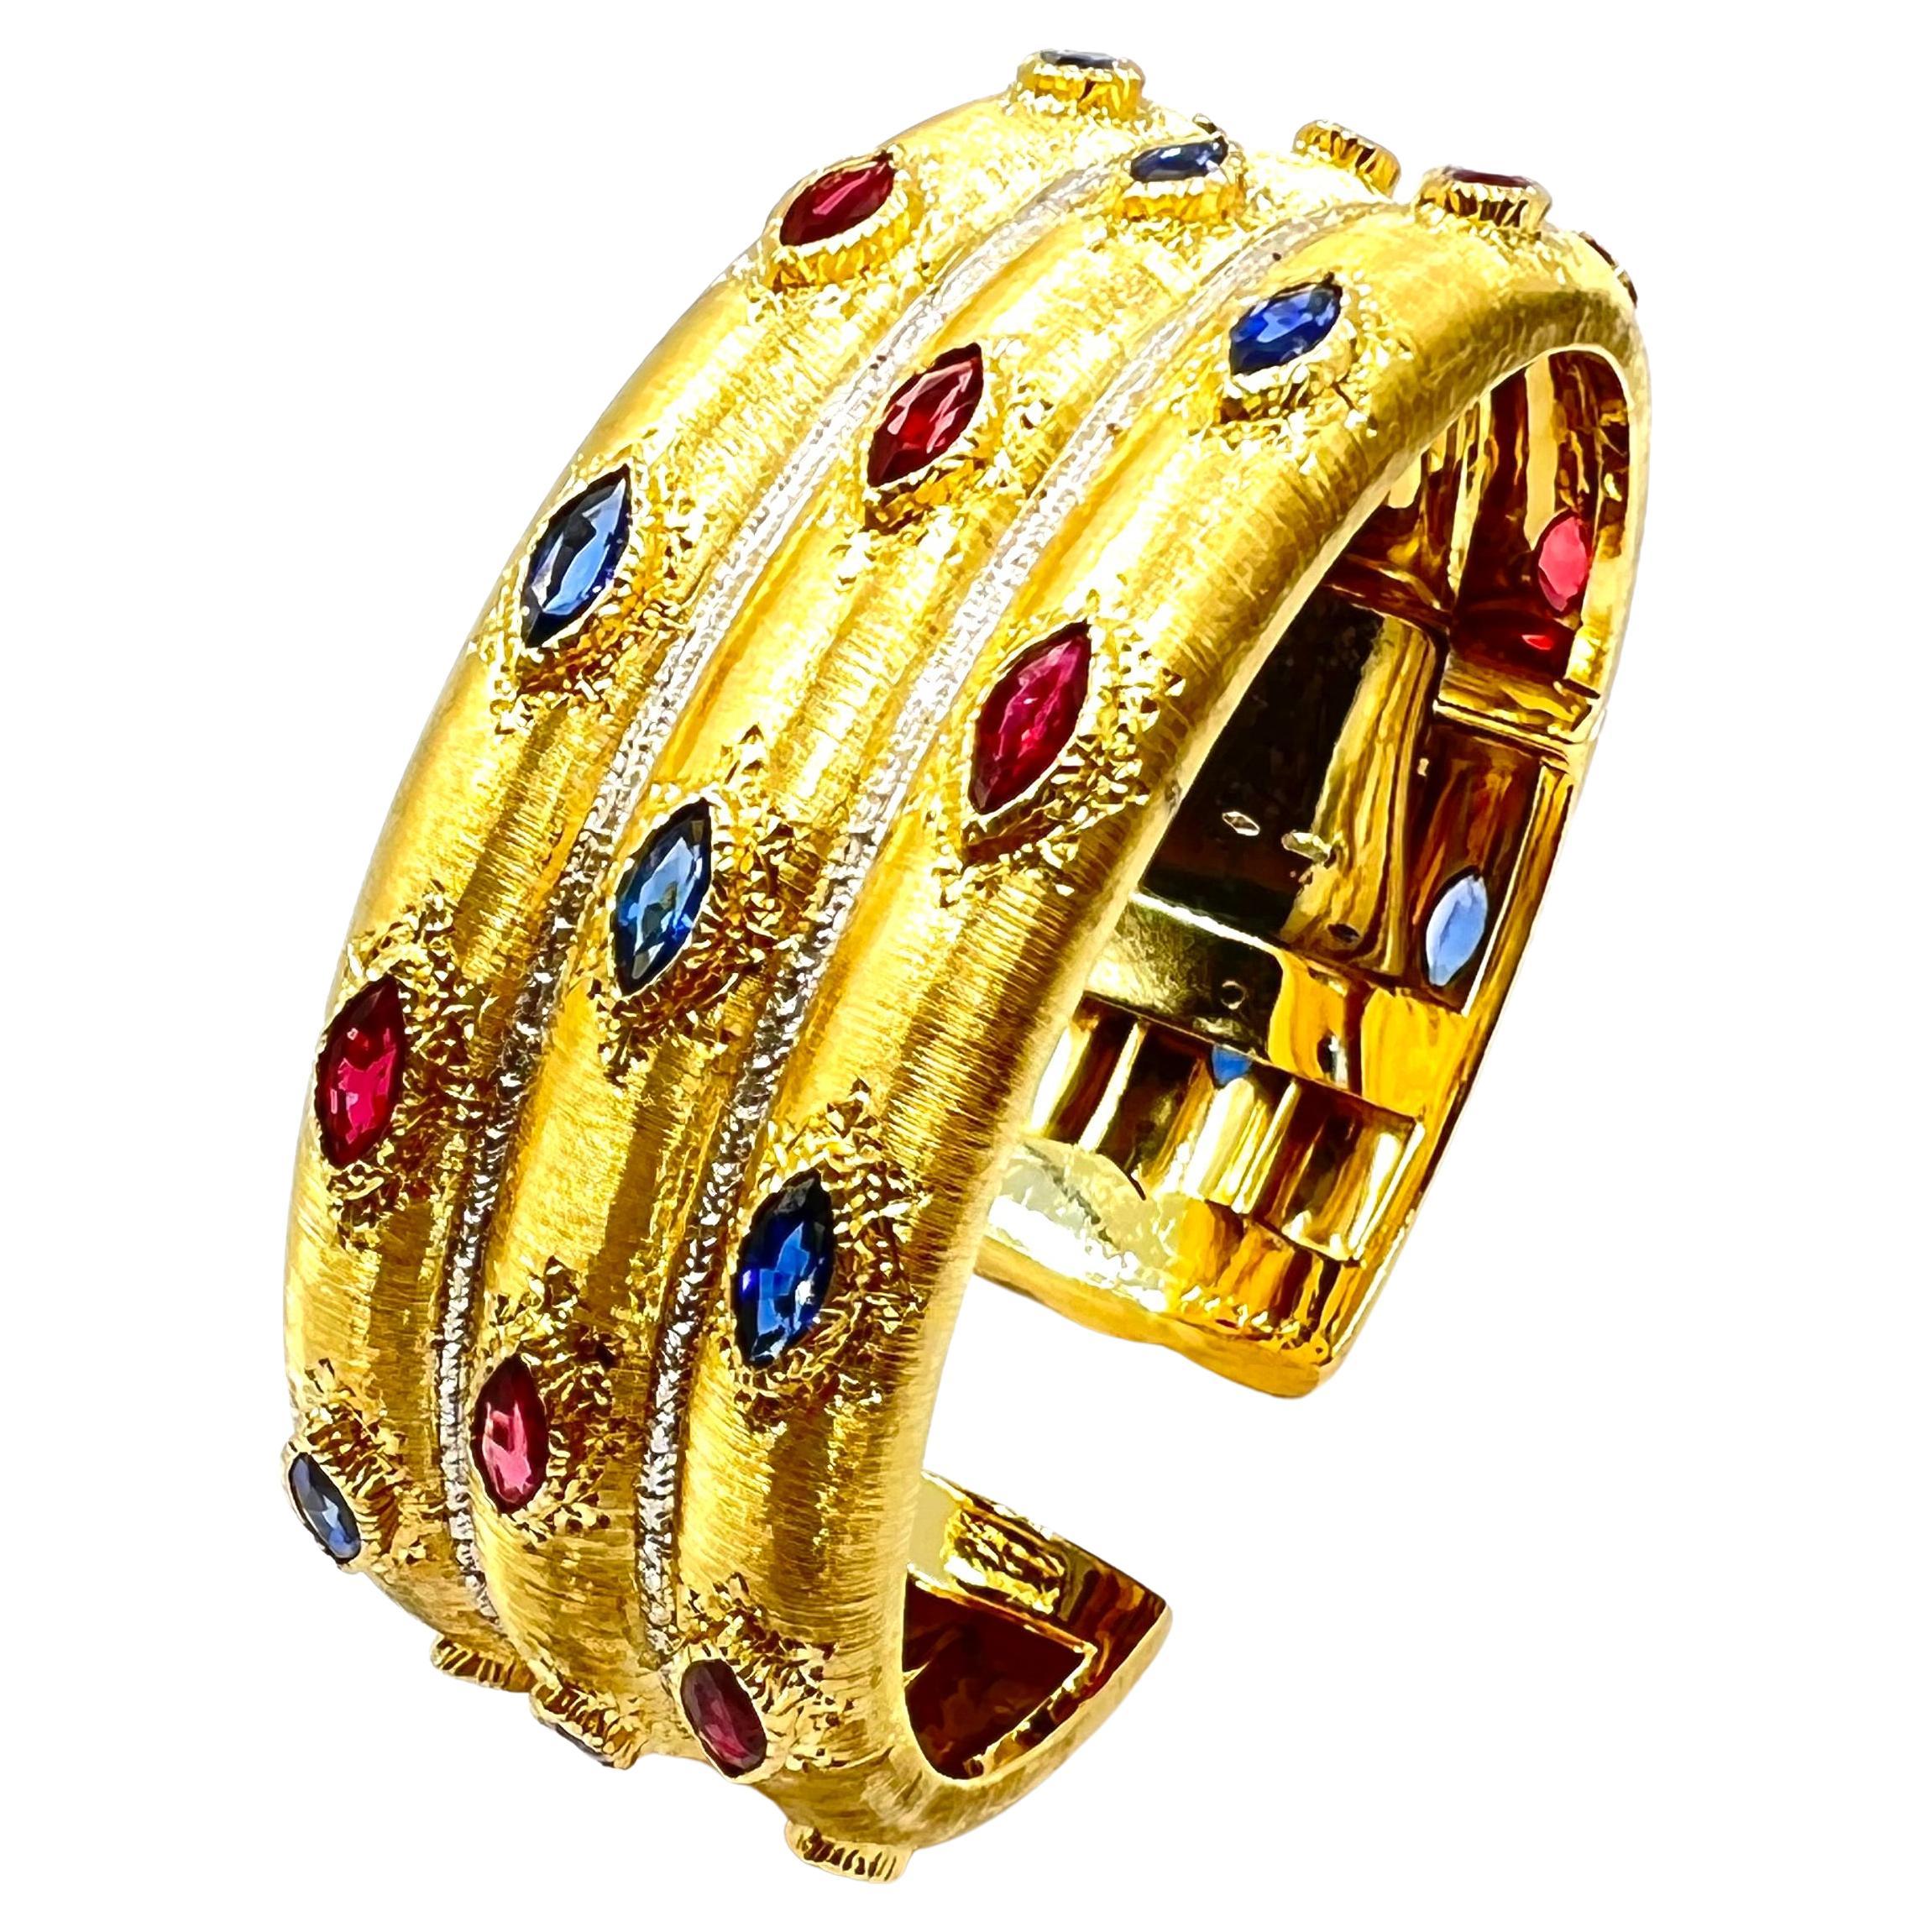 Early Mario Buccellati Gold and Diamond Cuff Bracelet For Sale at 1stDibs